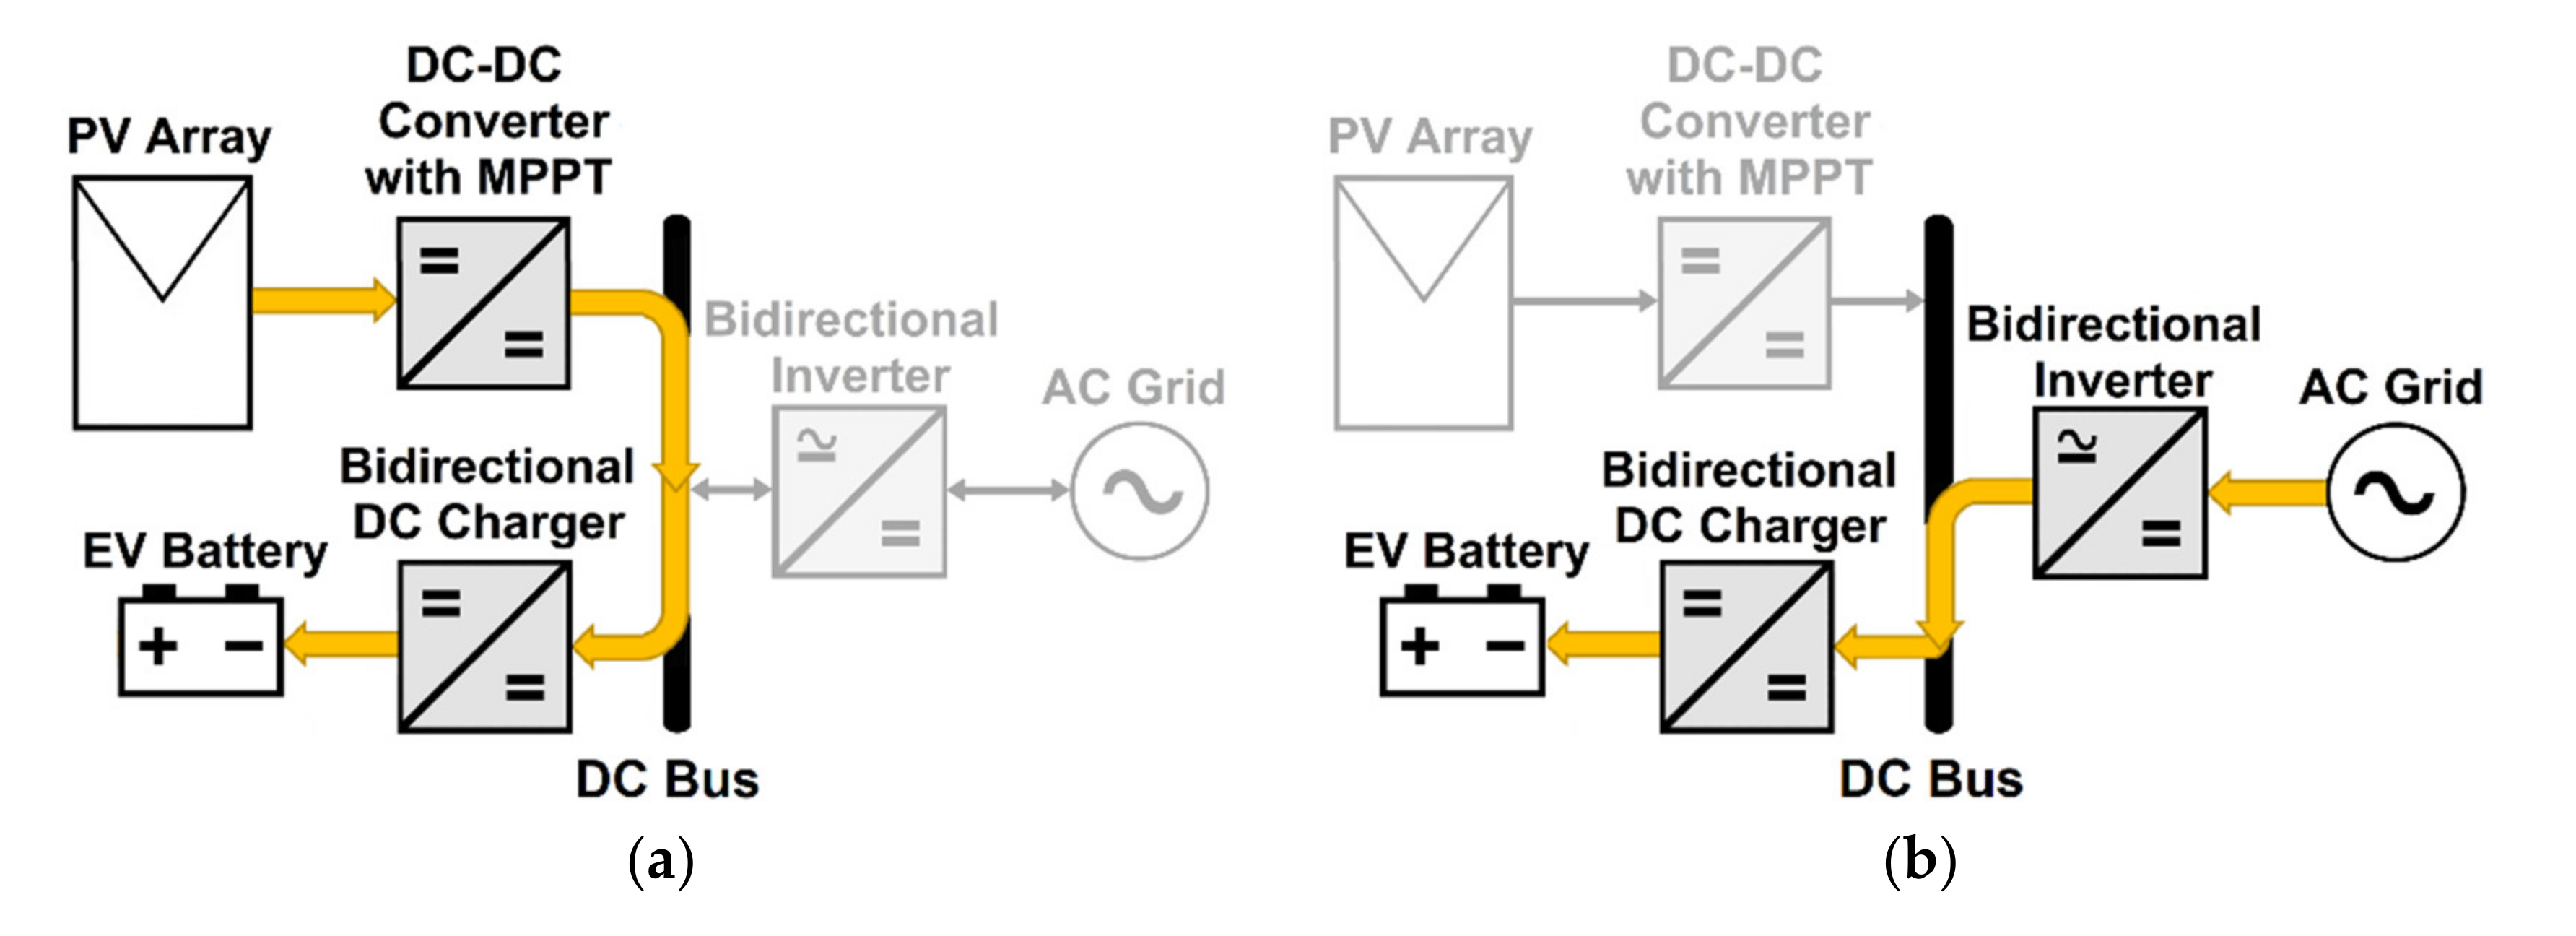 ADC-and-Power-Optimization-Solution-5-EVSYS/driver_isr.c at master ·  lkvenild/ADC-and-Power-Optimization-Solution-5-EVSYS · GitHub